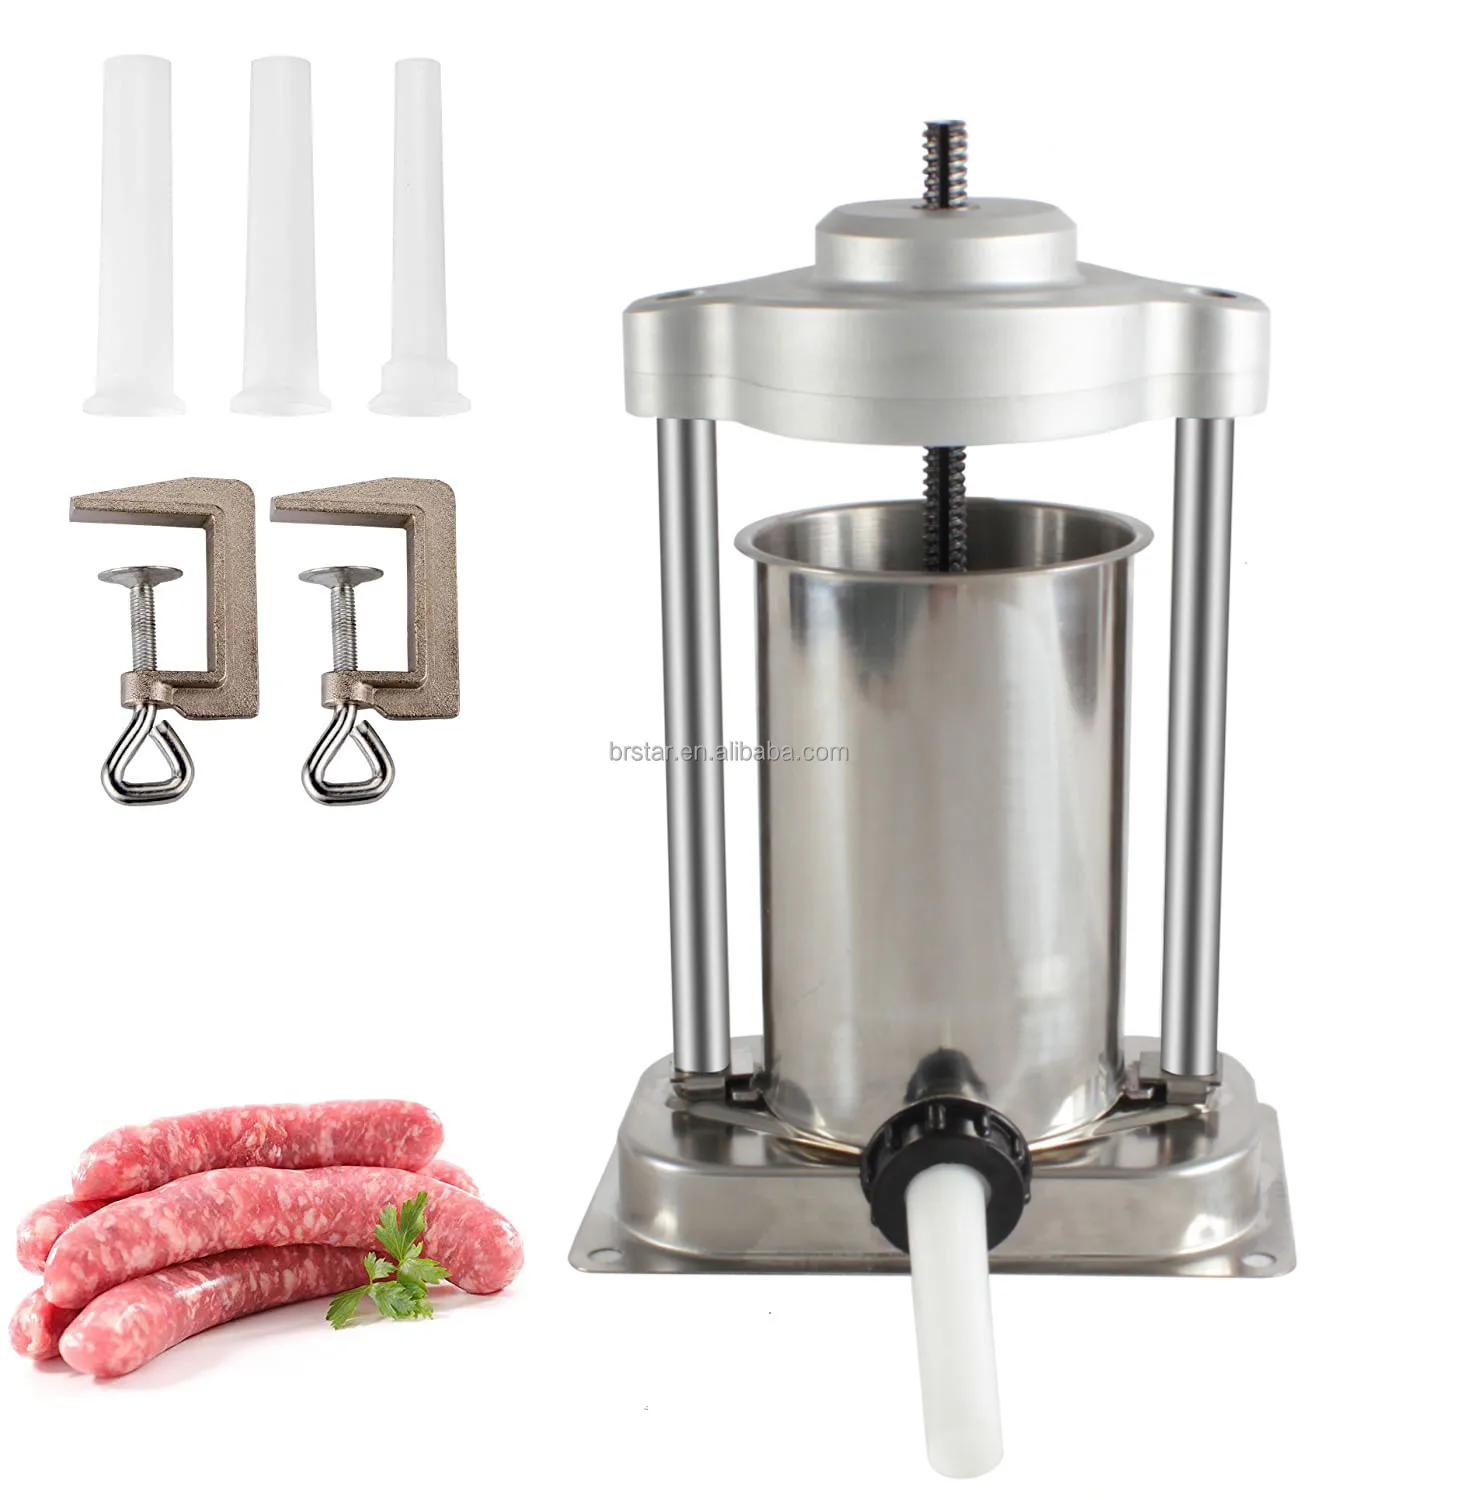 Sausage Stuffer, Stainless Steel Homemade Sausage Maker Meat Filling  Kitchen Machine, Packed Stuffing Tubes (5LBS Stainless Steel)